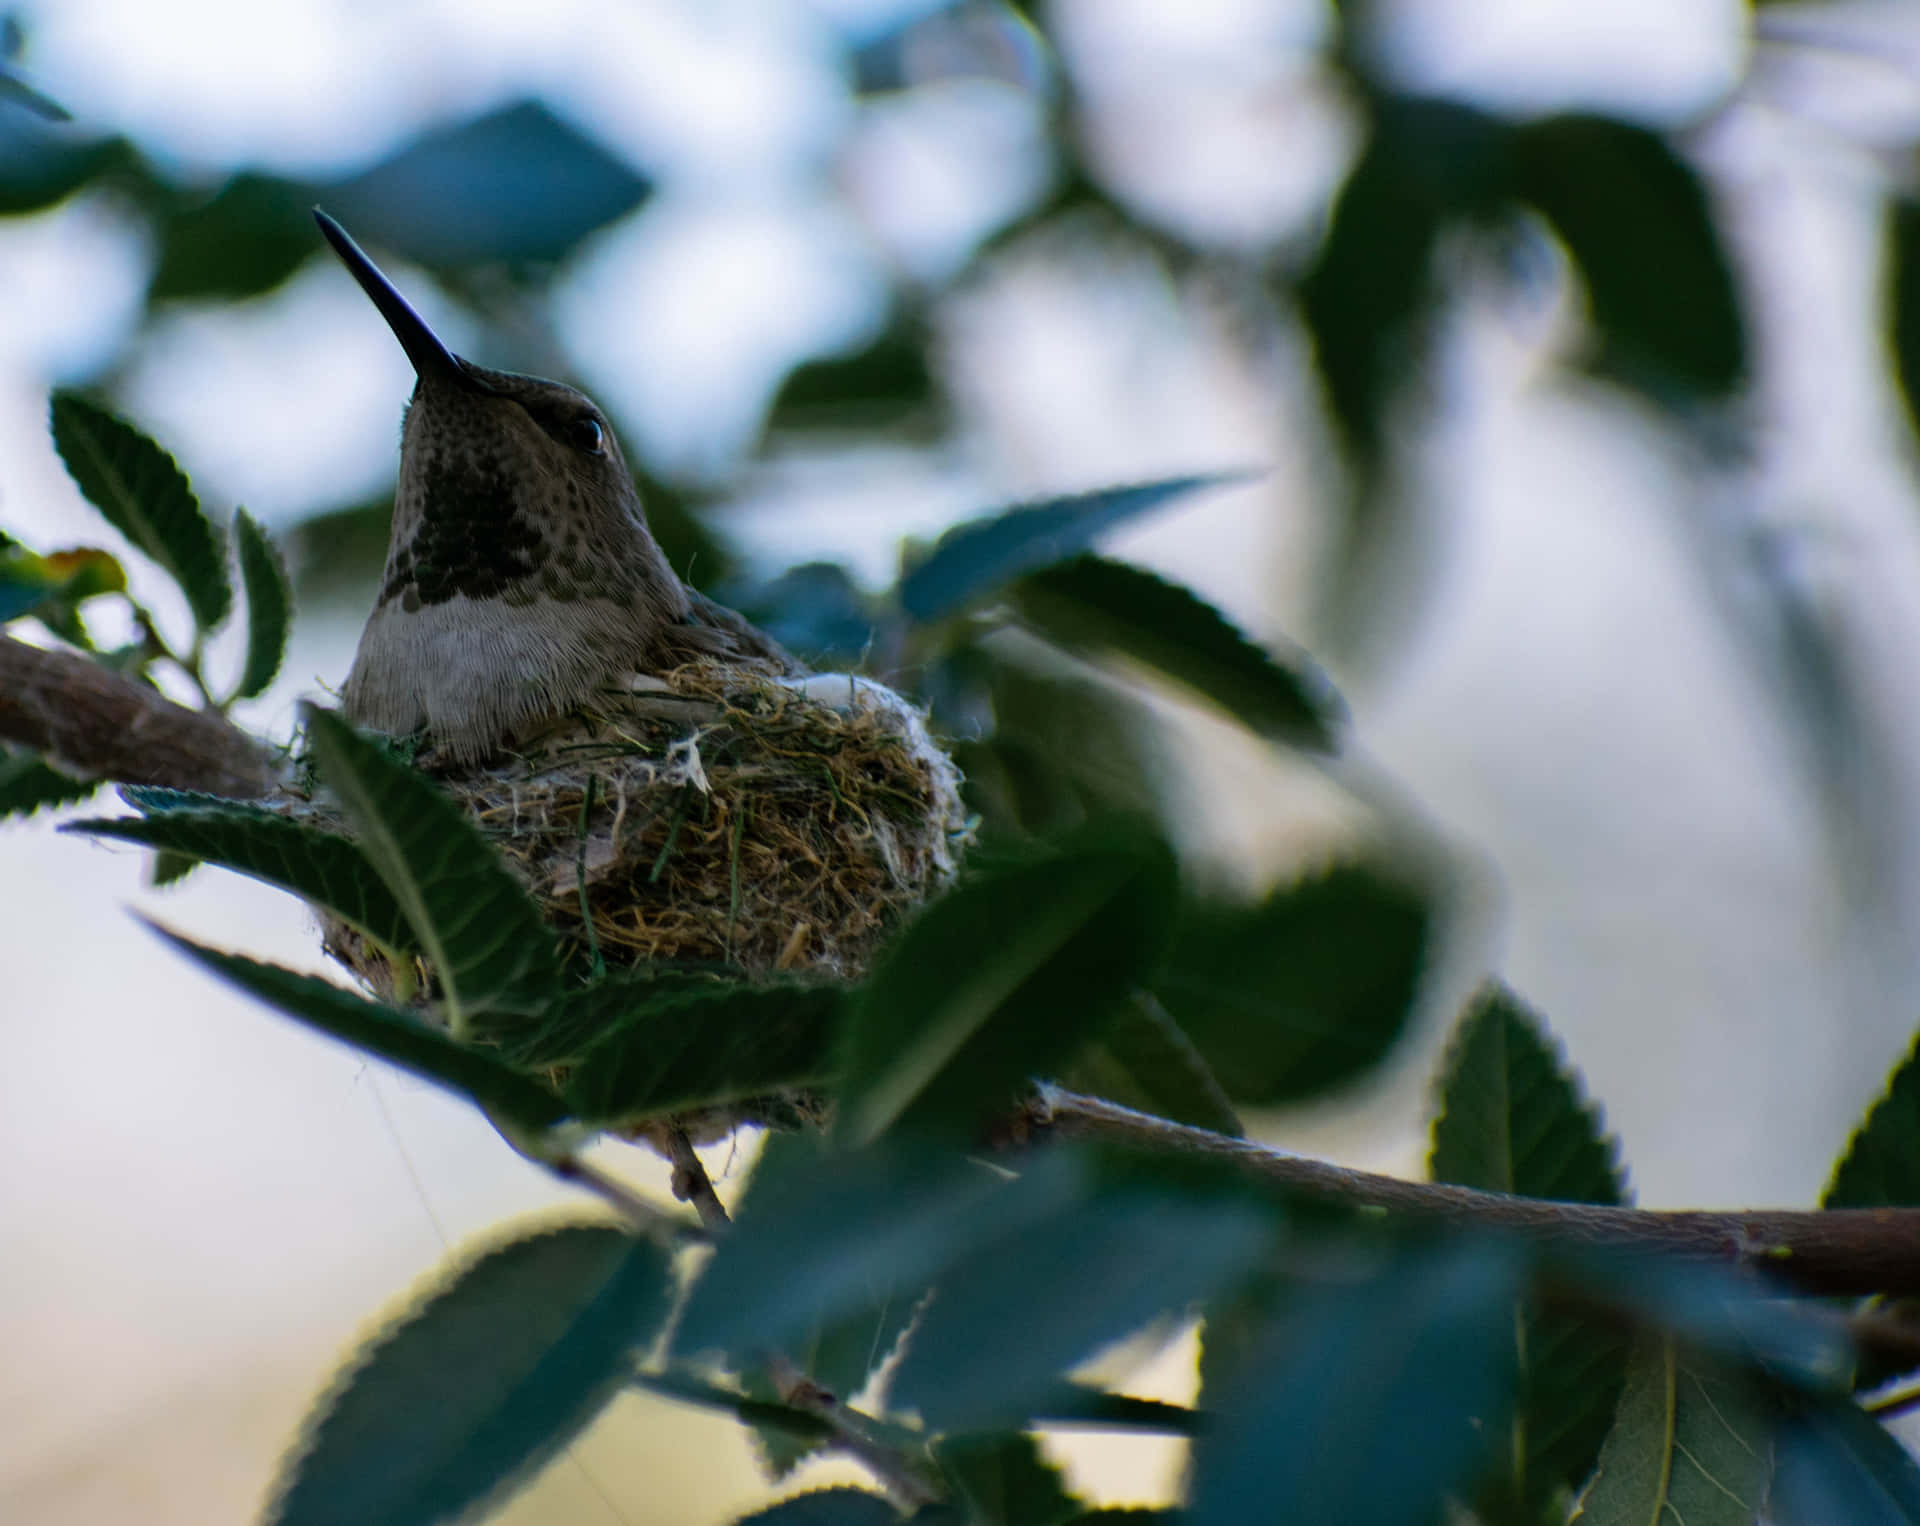 A delicate hummingbird nest held in the branches of a vibrant green tree.